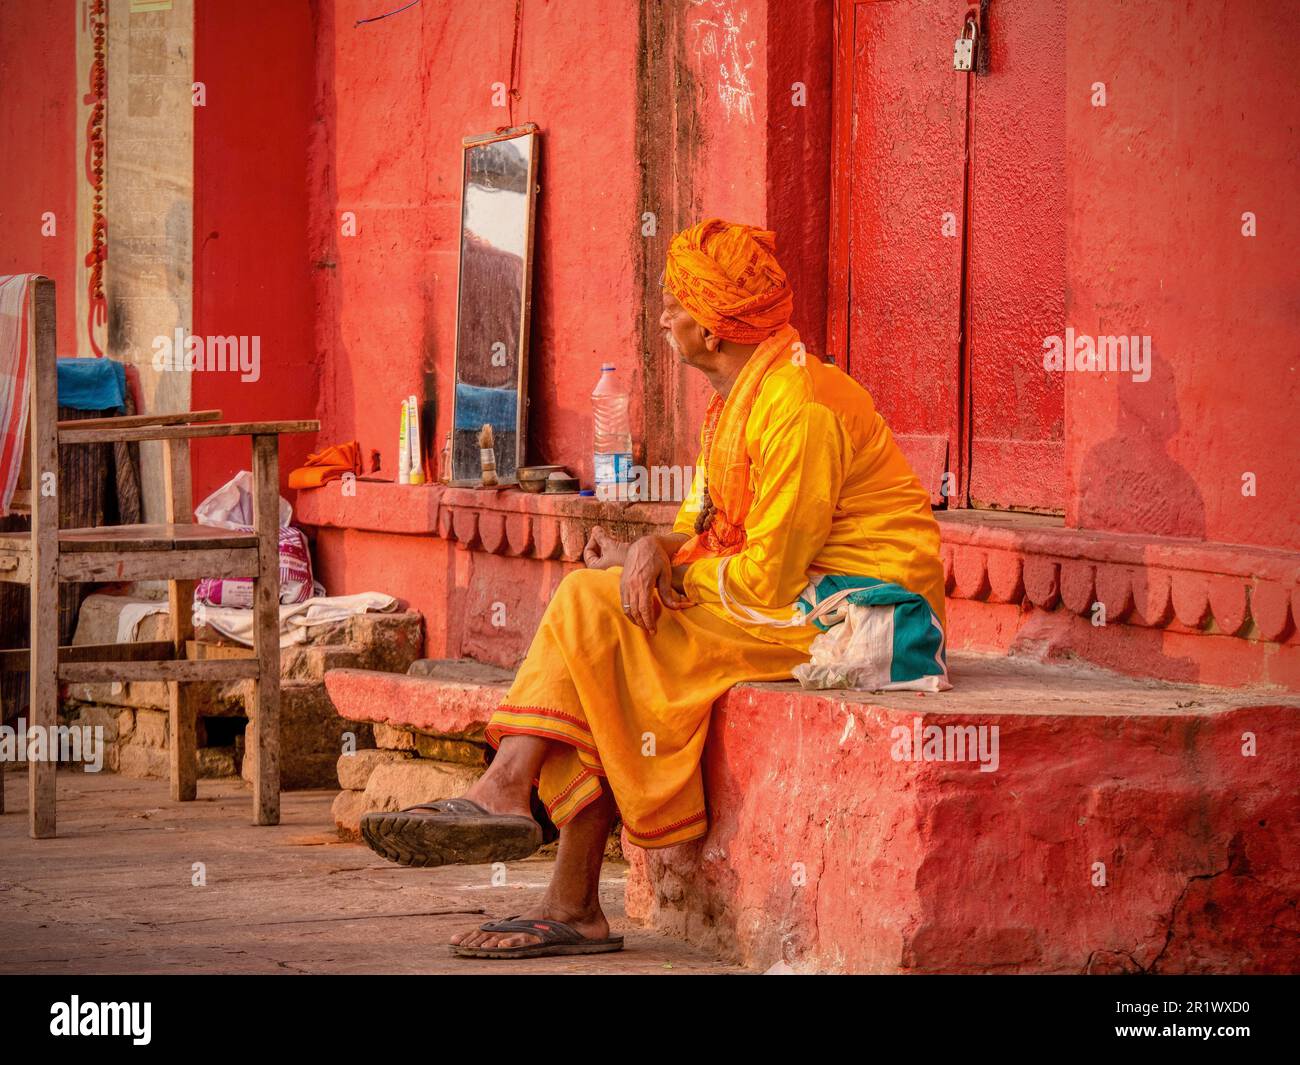 Varanasi, India - November 13, 2015. An Indian barber wearing traditional clothing waits for customers in a makeshift outdoor space. Stock Photo